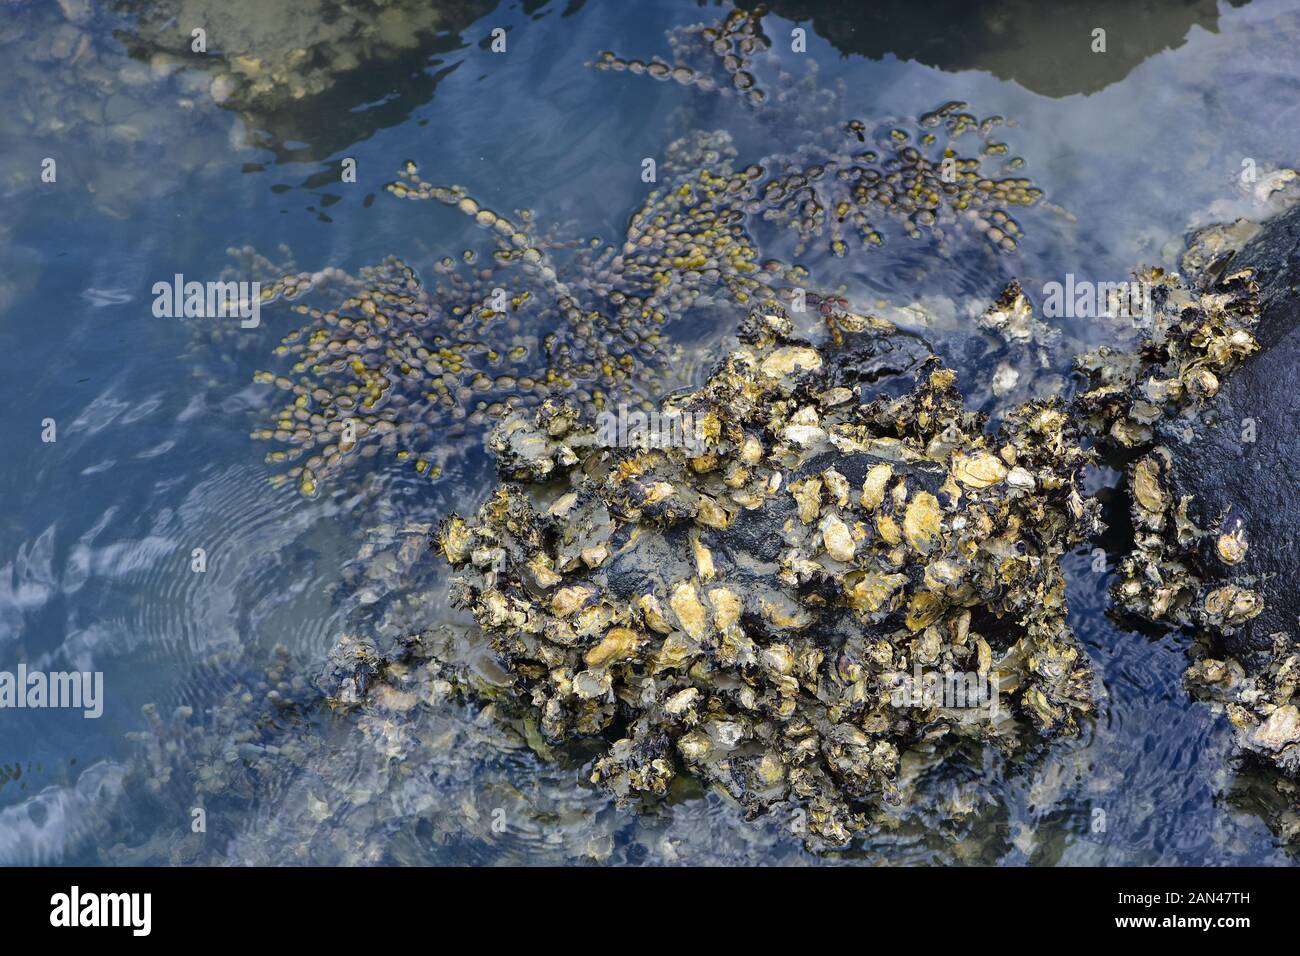 Dark rock covered with oyster shells protruding from rock pool at low tide. Stock Photo